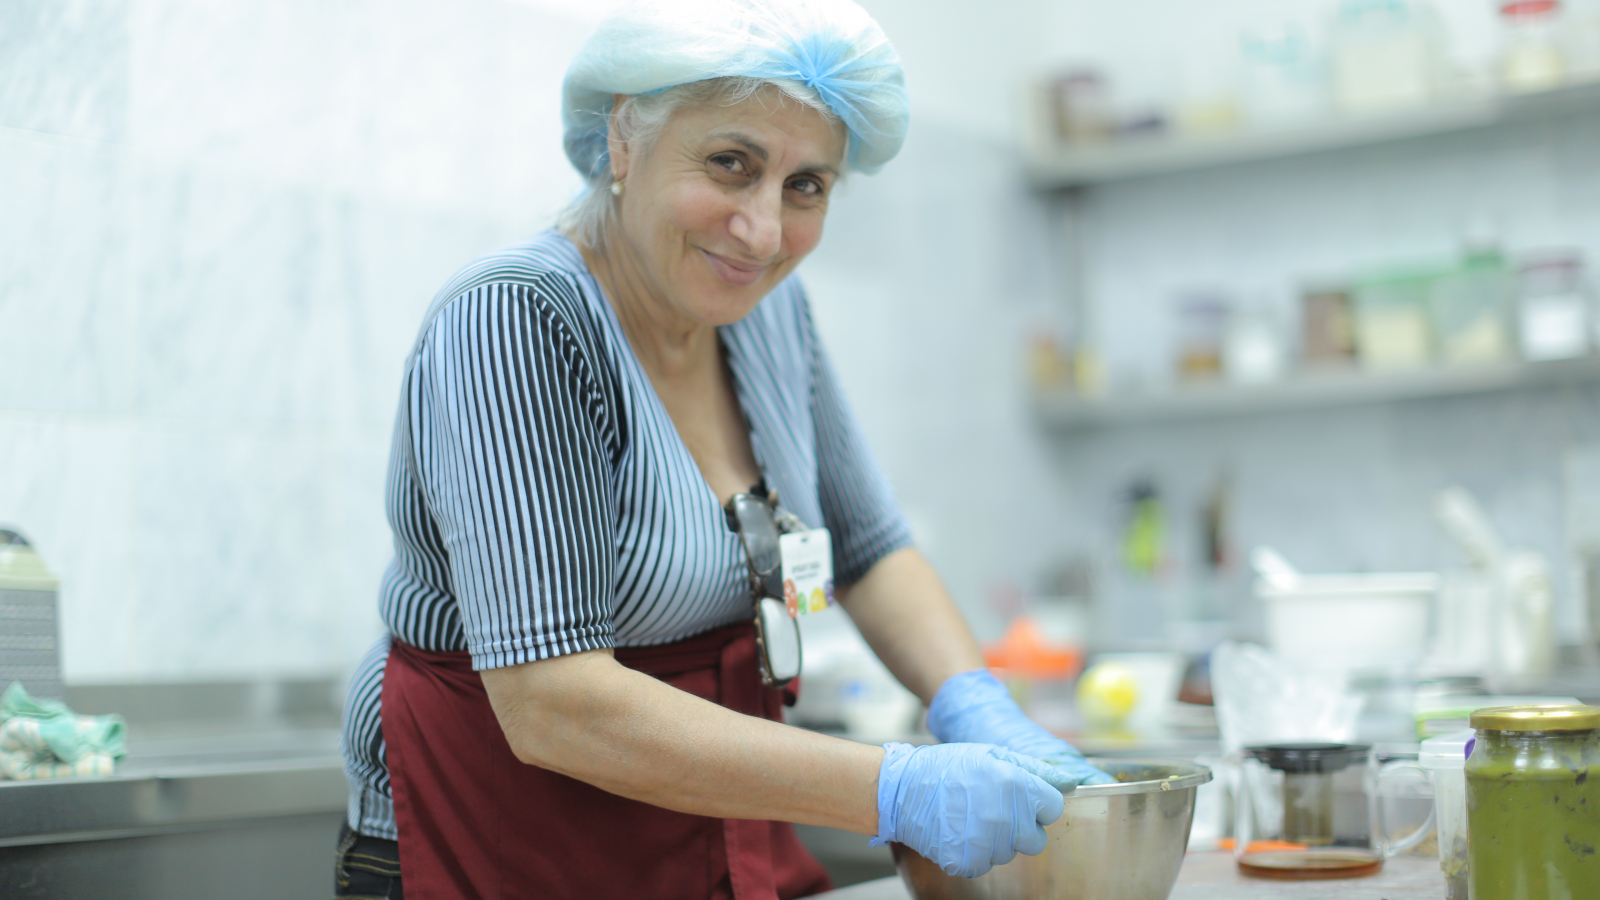 Armenia: Local currency financing for micro and small enterprises thanks to EU4Business initiative